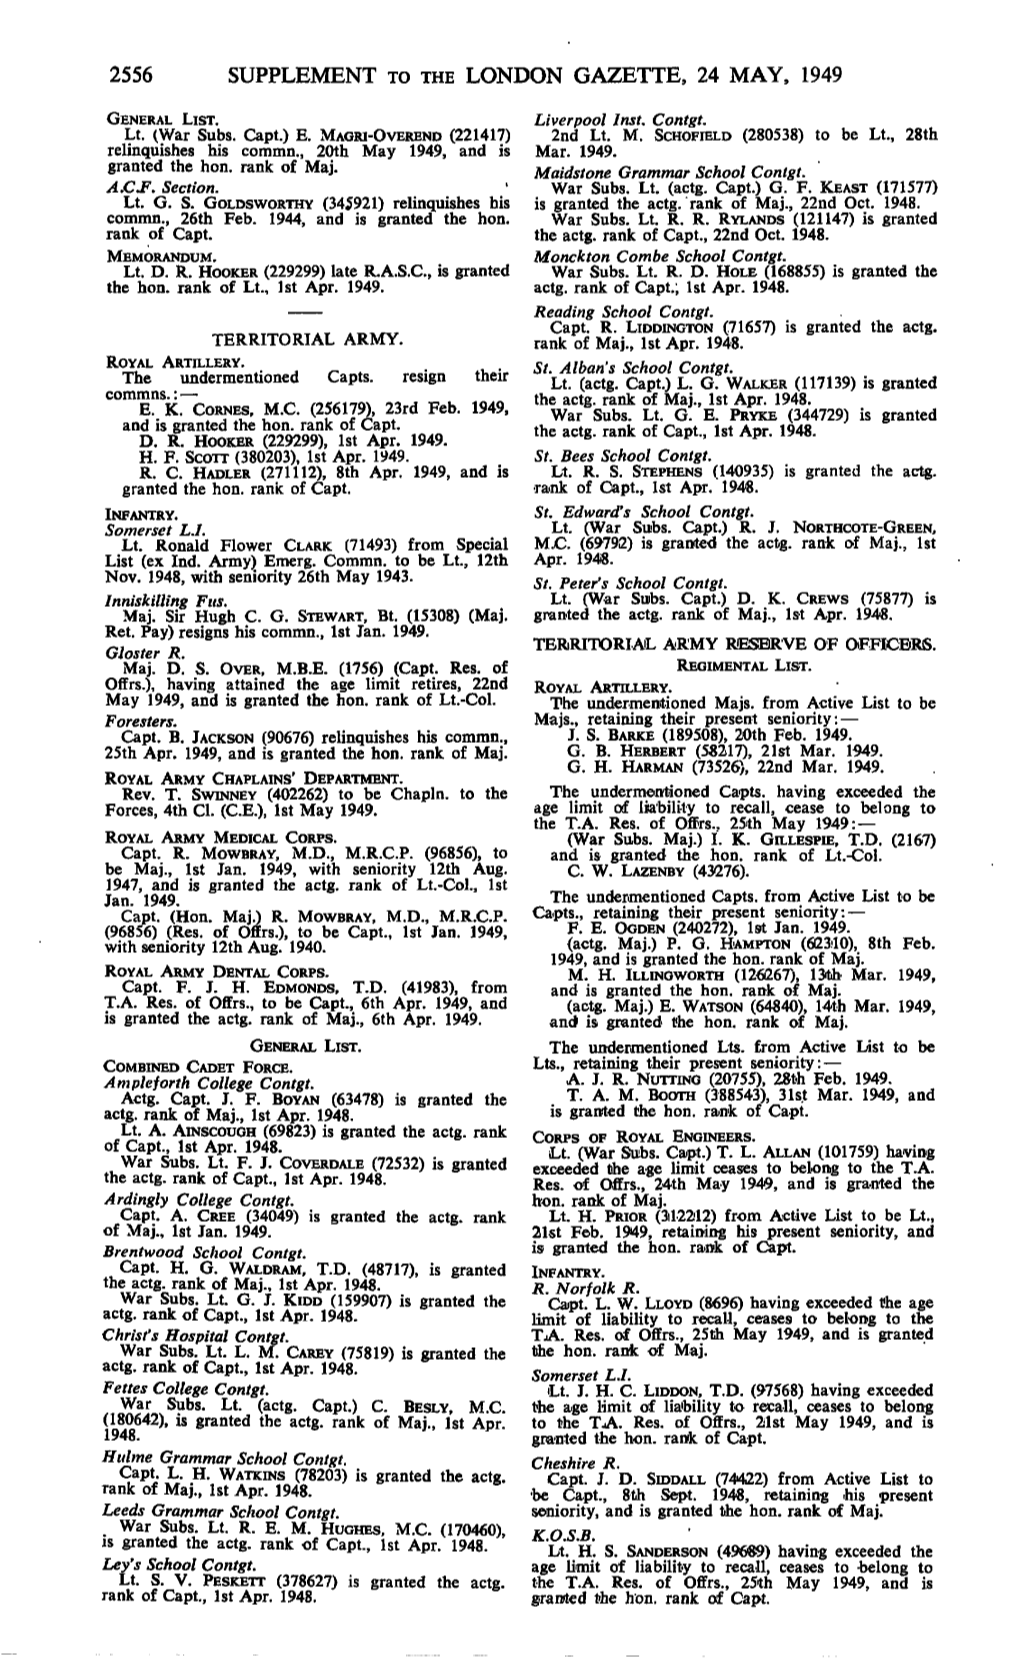 2556 Supplement to the London Gazette, 24 May, 1949